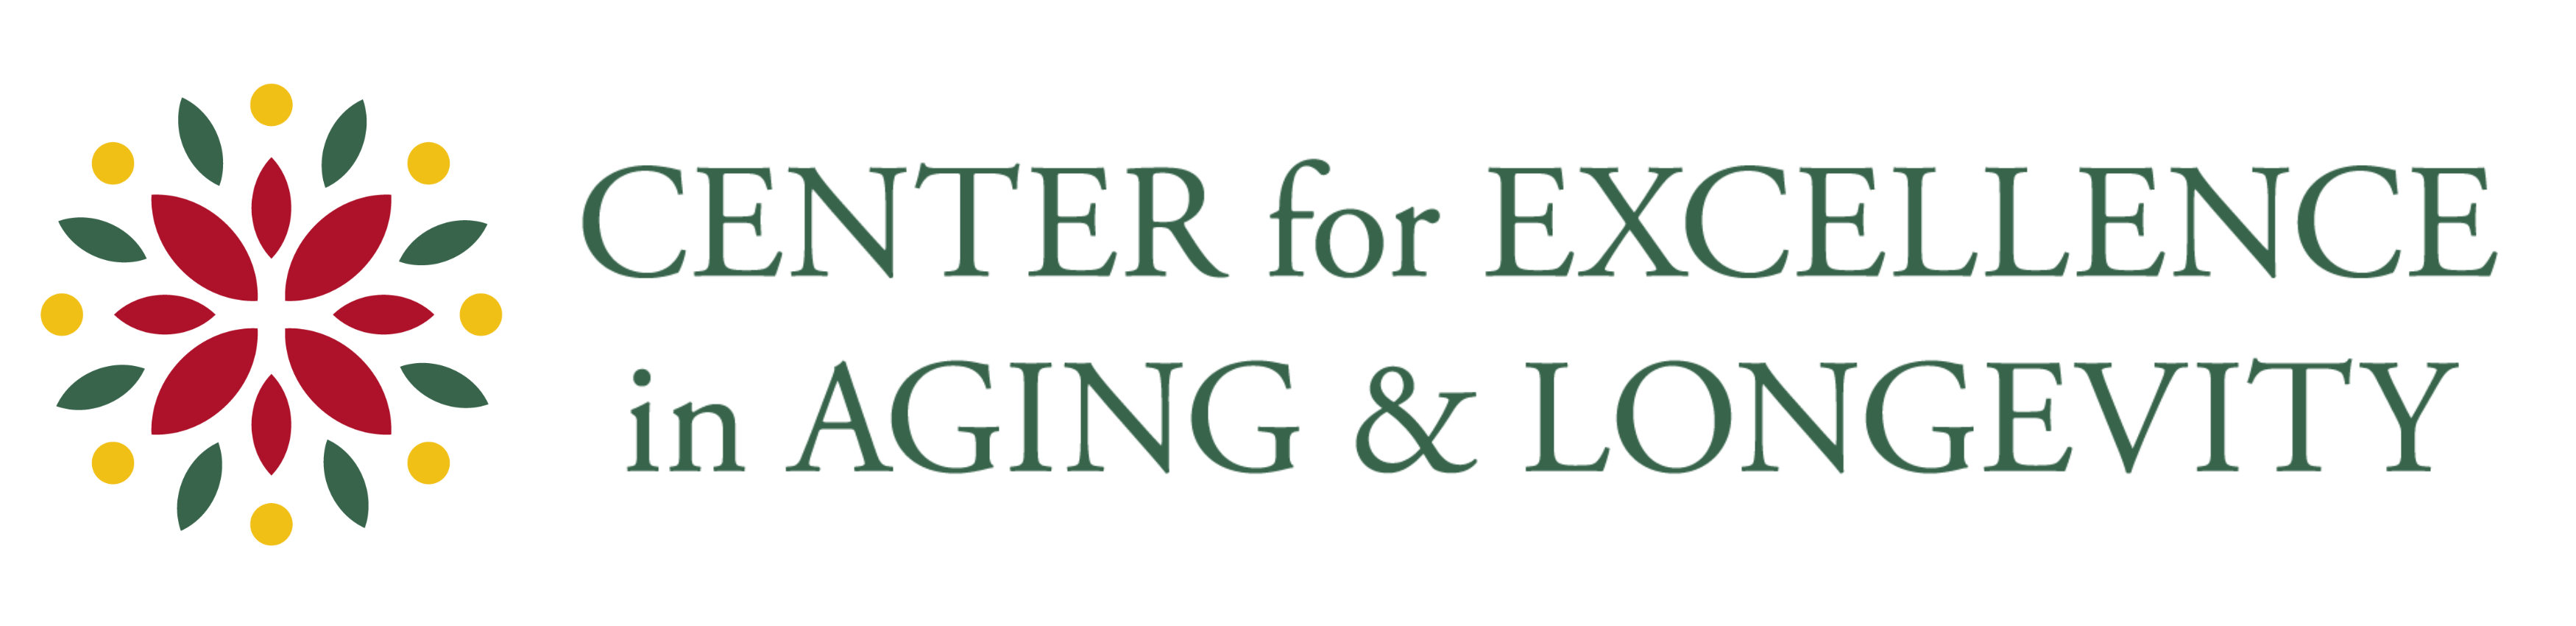 Center for Excellence in Aging and Longevity